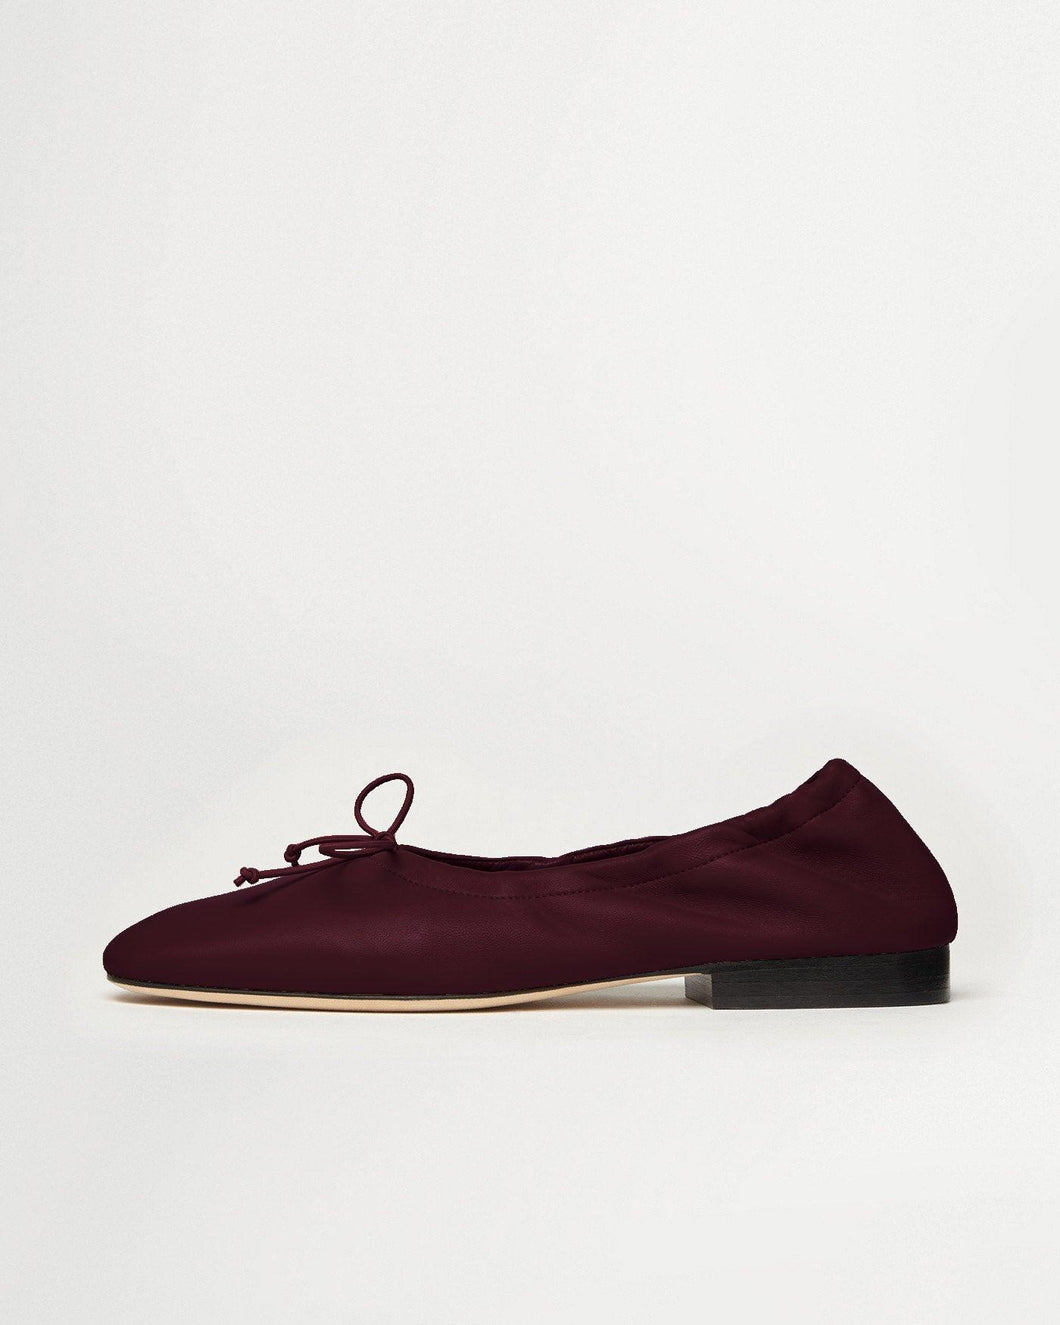 Side view of Yuni Buffa Pia Ballerina shoe in Burgundy color made in Italy with soft Italian Lamb Nappa leather